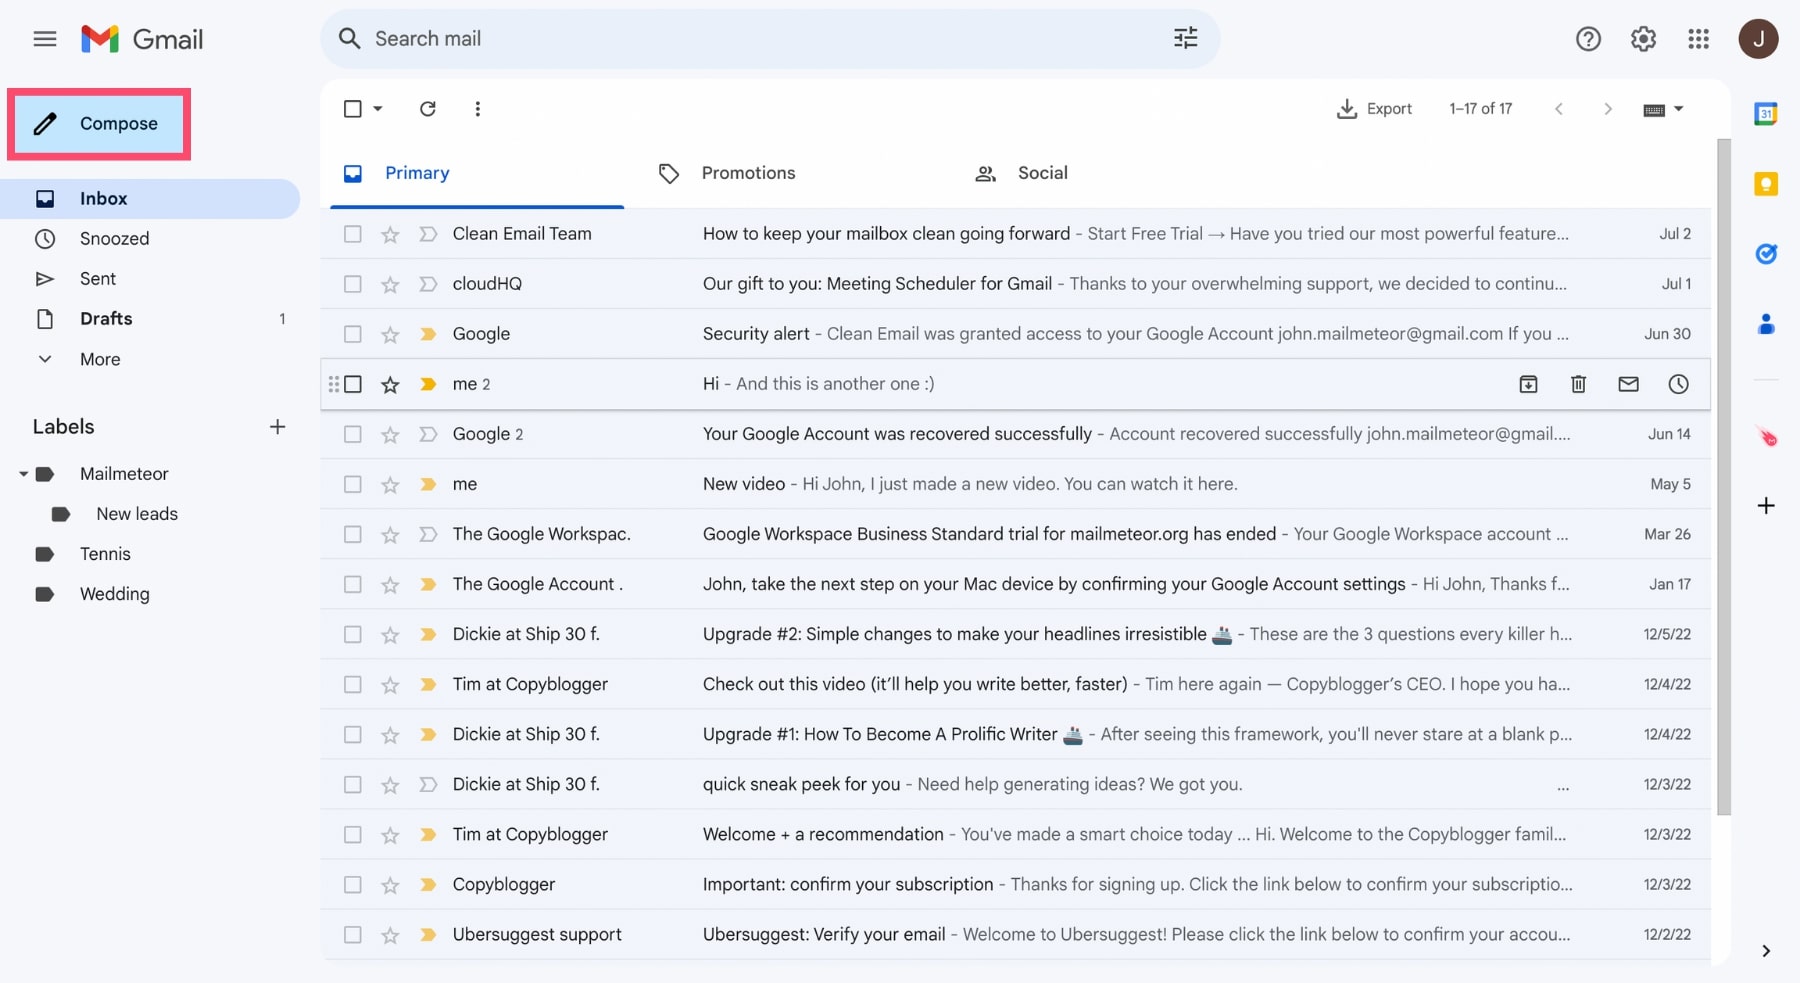 Create a new email in Gmail